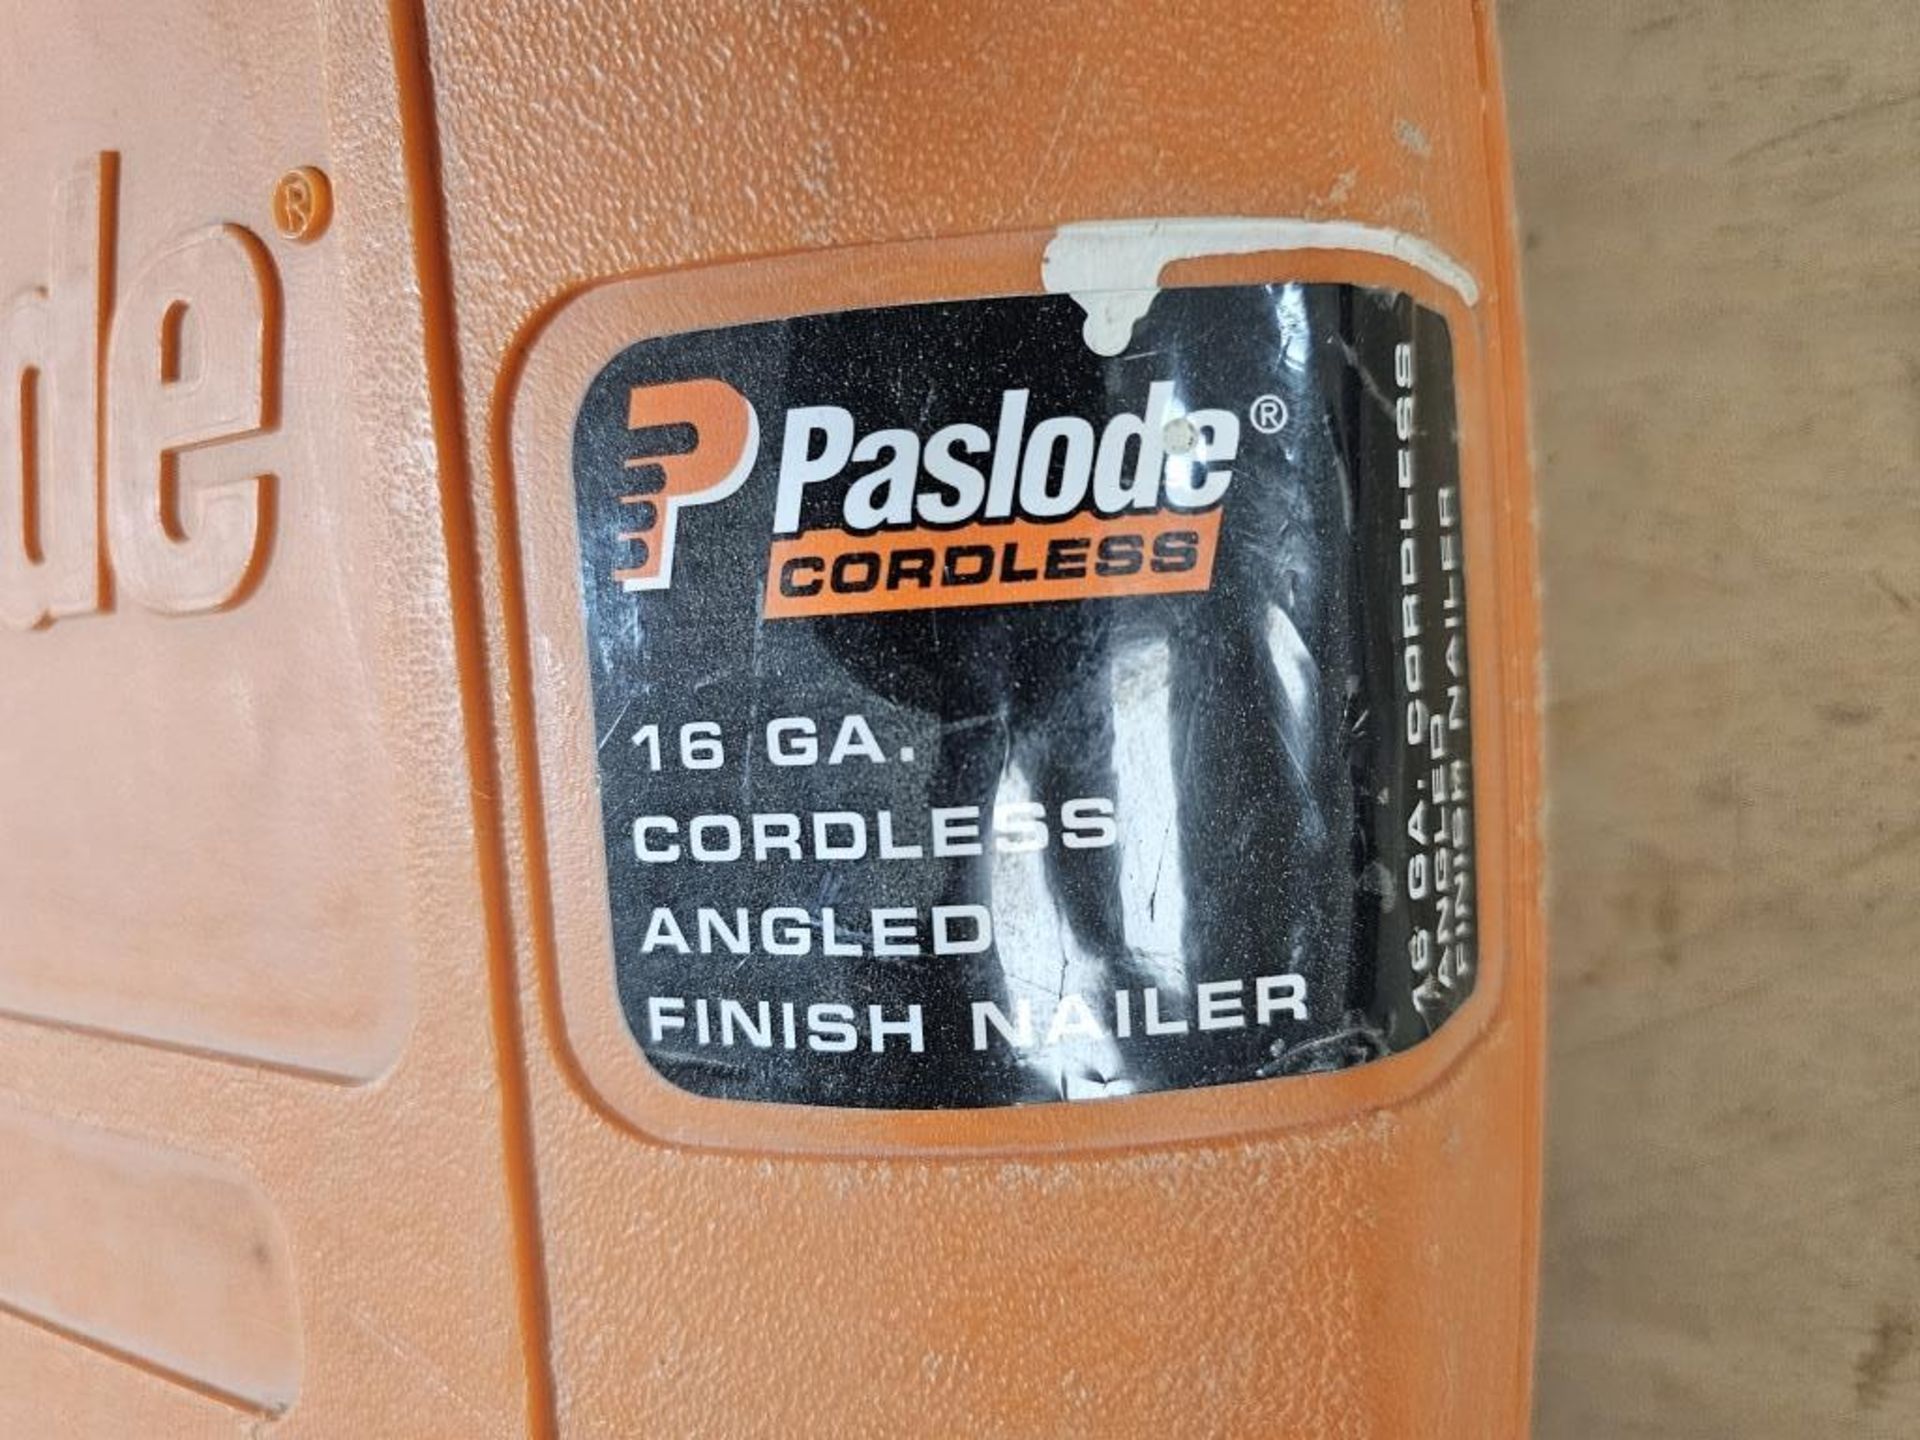 Paslode Cordless Angled Finish Nailer/Battery Chargers - Image 5 of 7